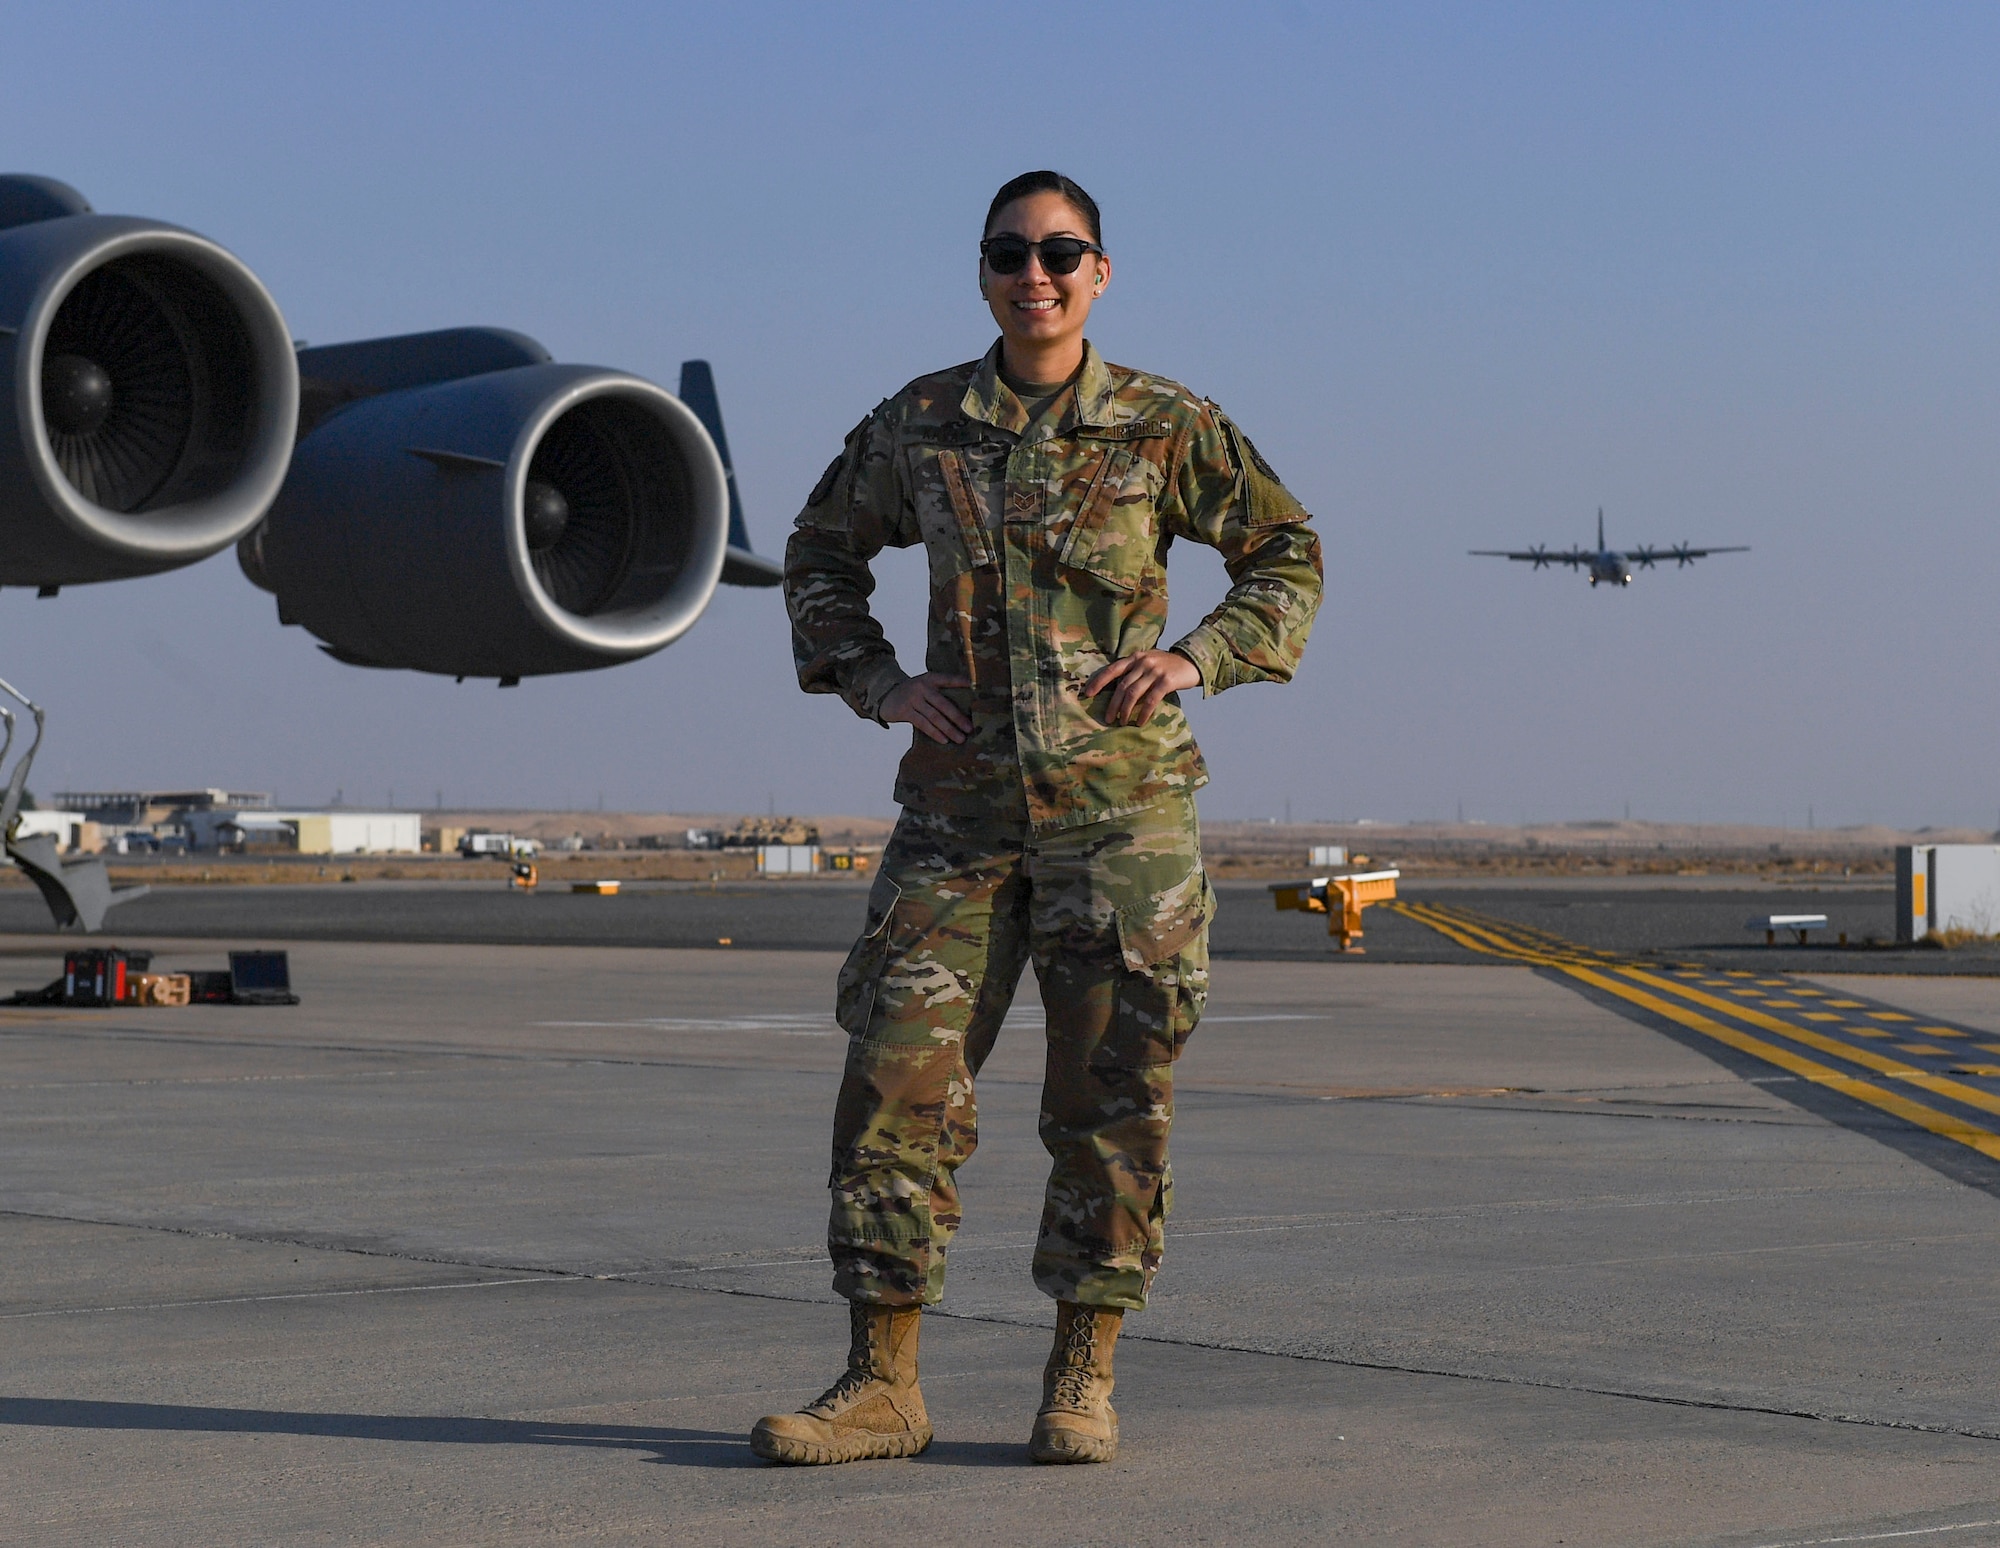 U.S. Air Force Staff Sgt. Cinnamon Kava, 5th Expeditionary Air Mobility Squadron combat oriented support operations supply specialist, poses on the runway at Ali Al Salem Air Base, Kuwait, Nov. 18, 2020.